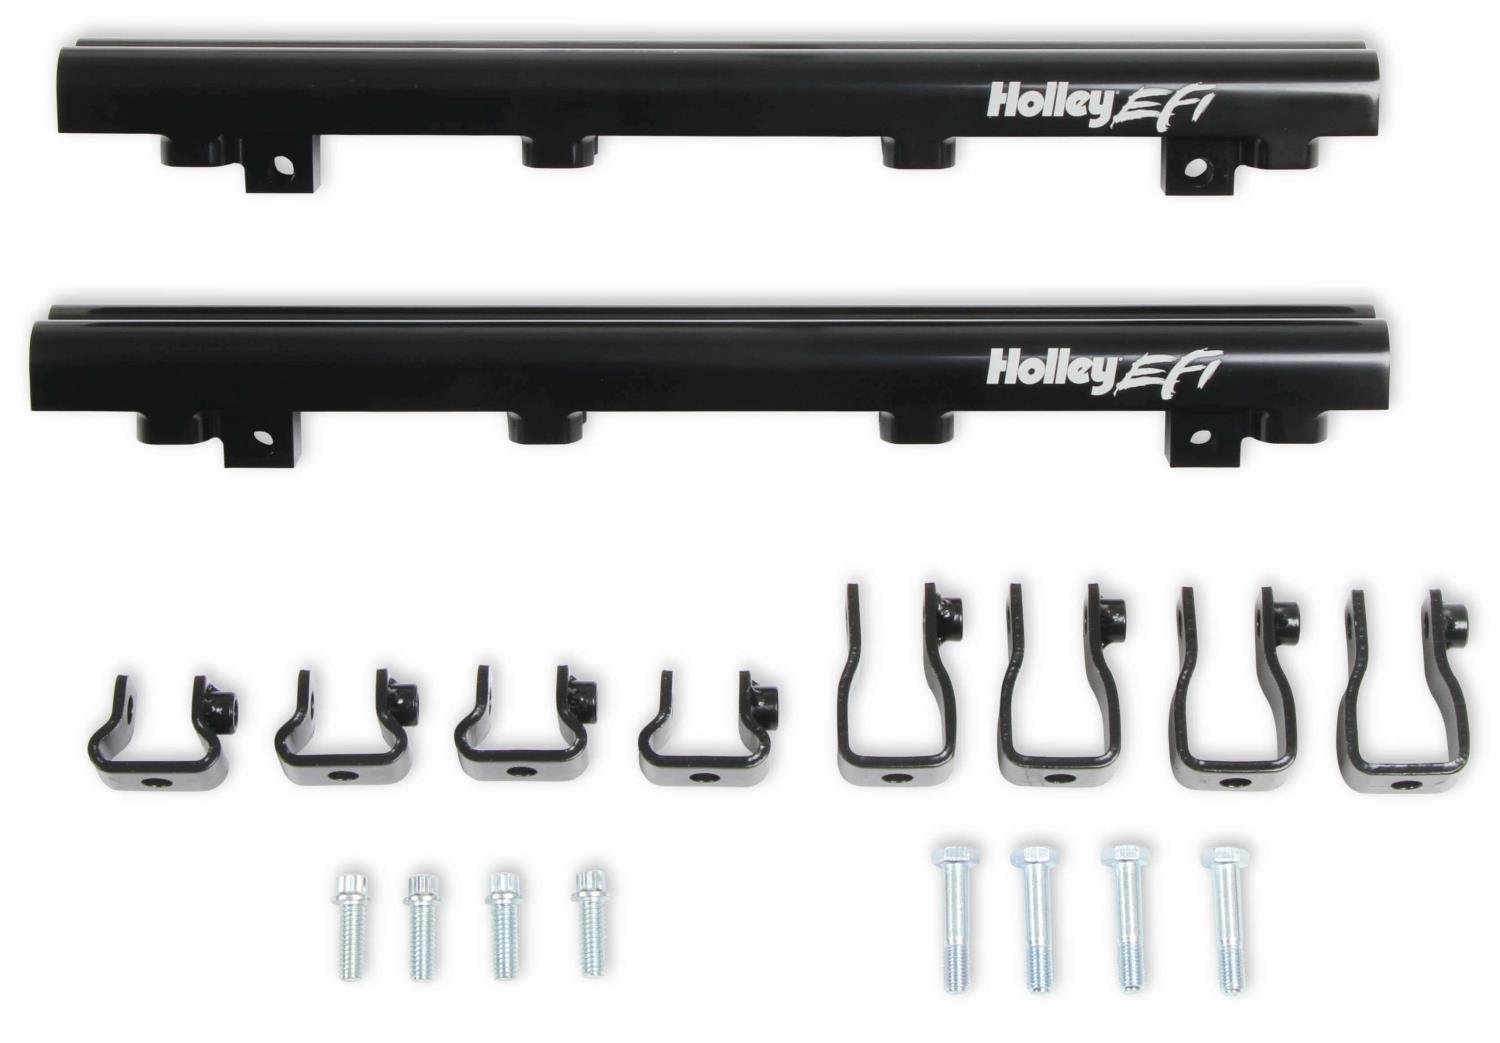 Replacement Fuel Rail Kit for Holley's Lo-Ram Dual Injector Intakes